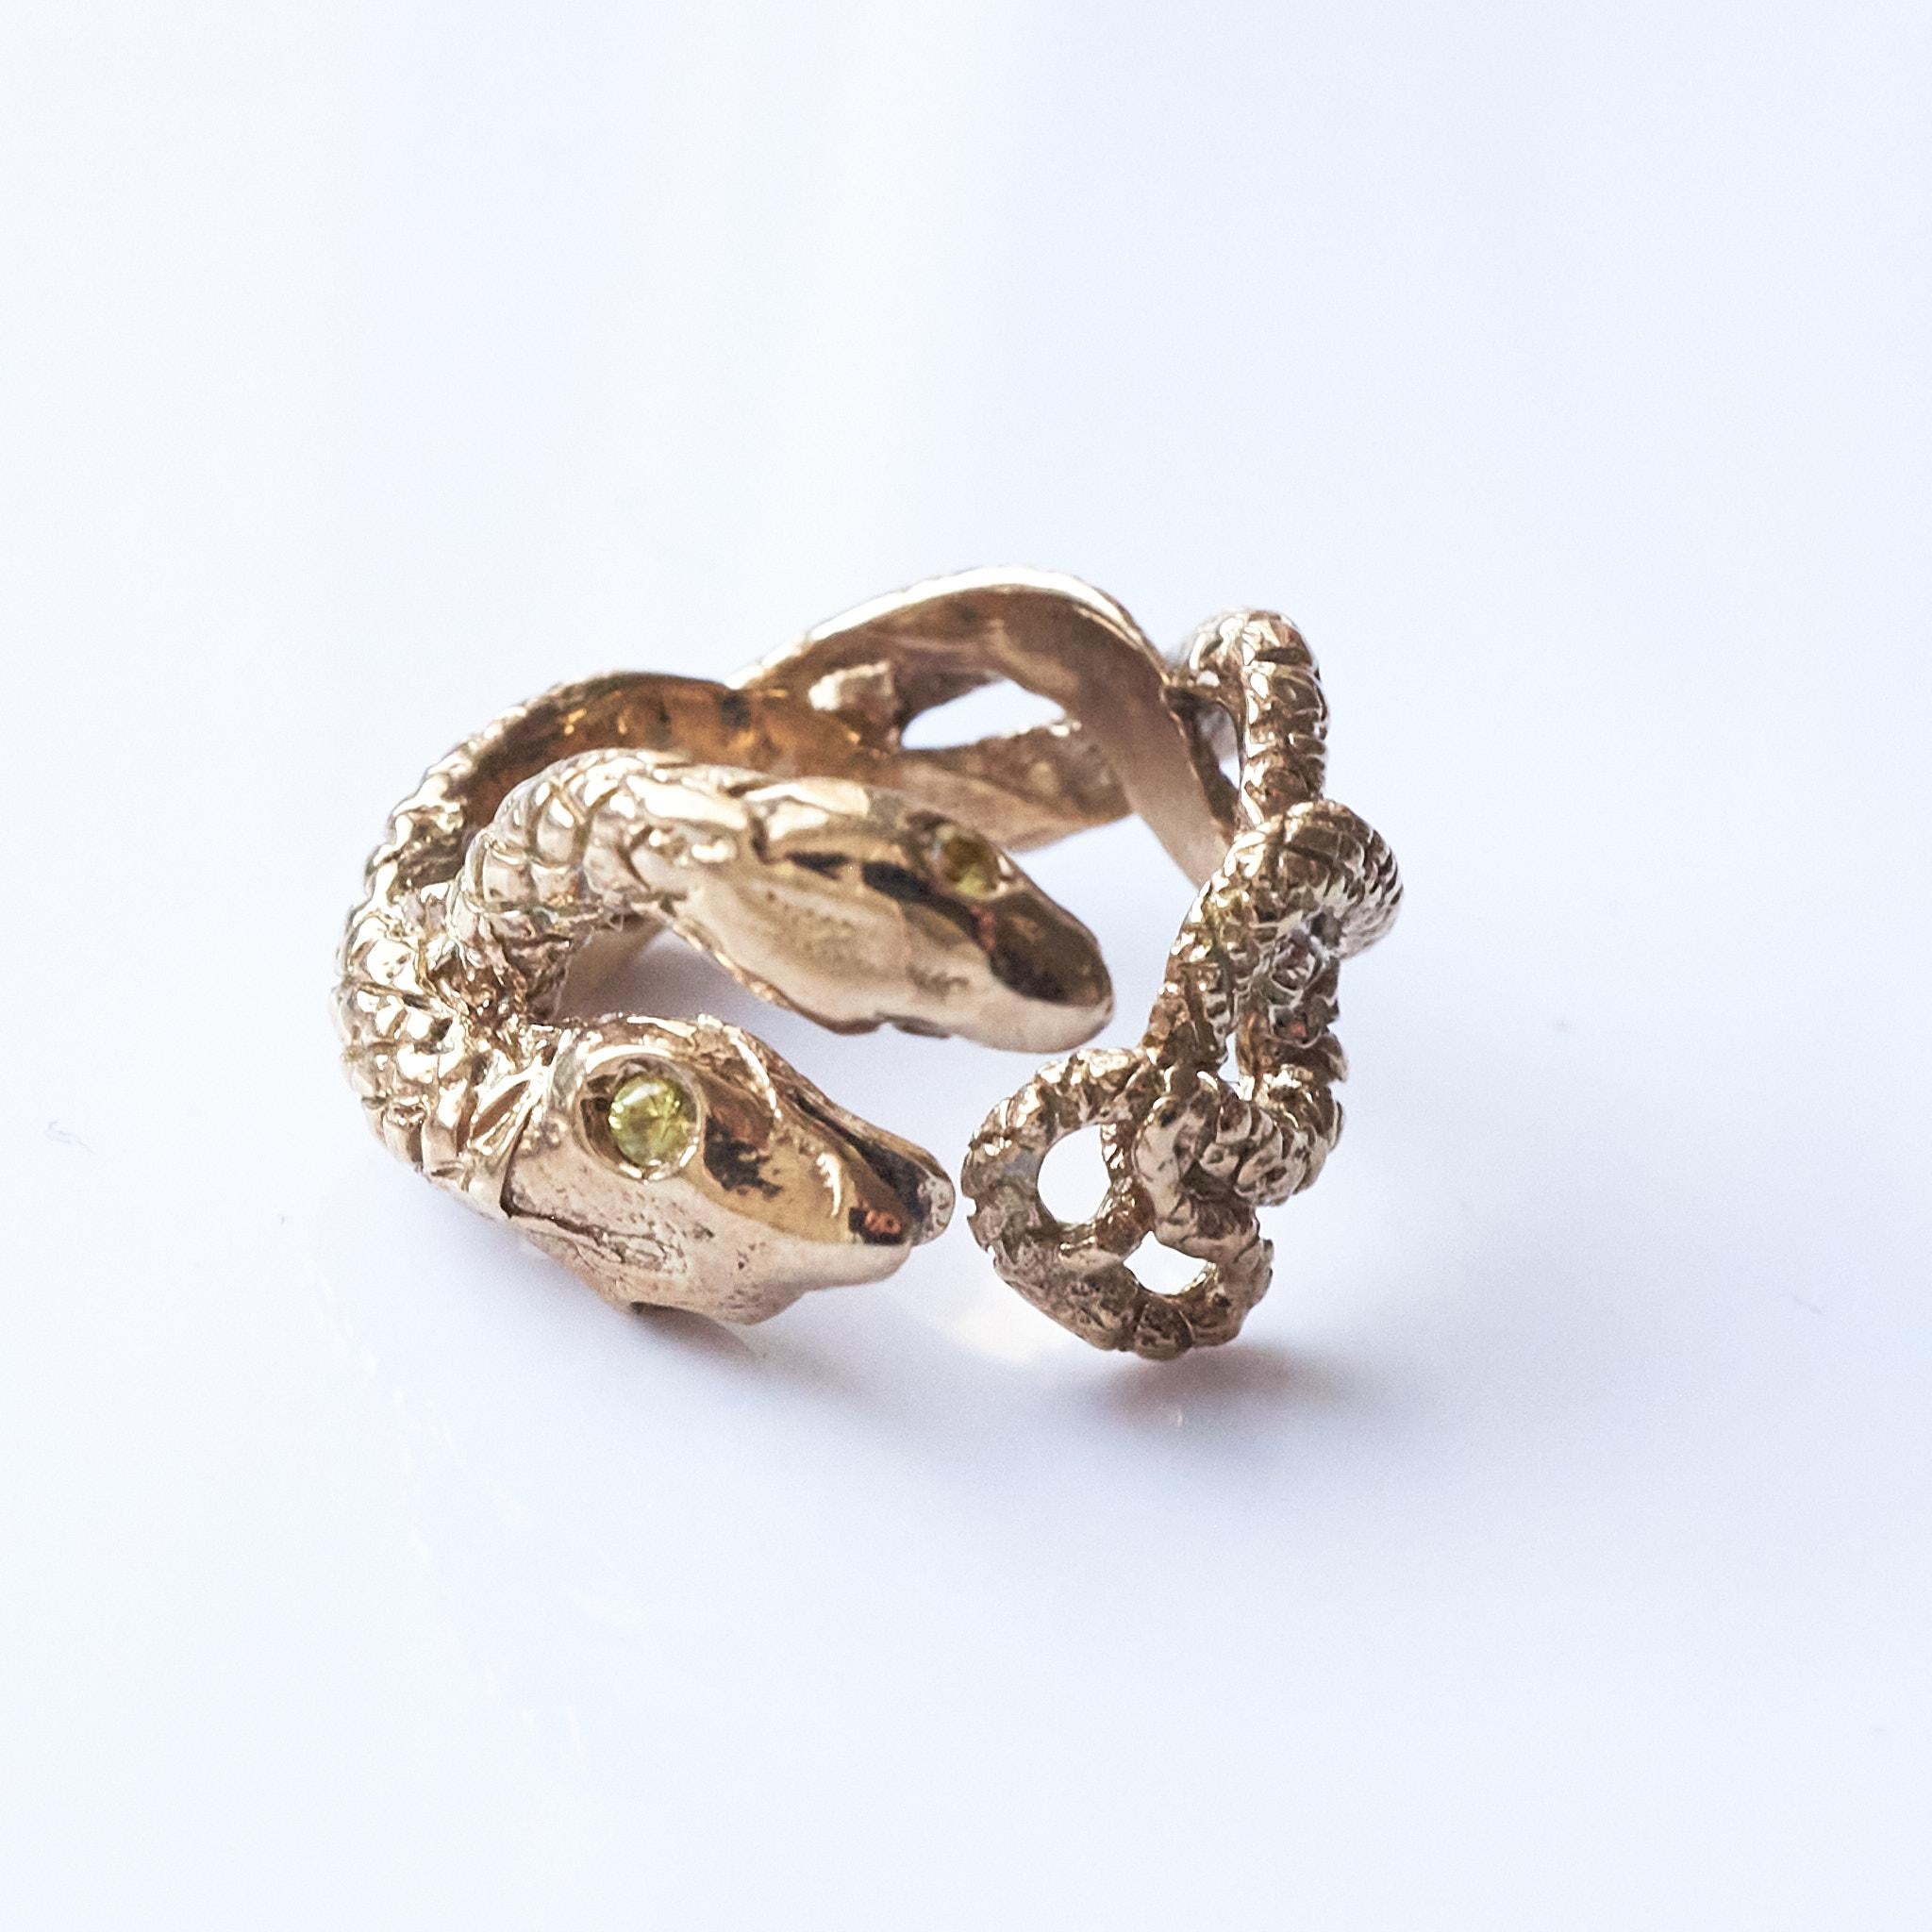 Brilliant Cut Yellow Sapphire Snake Ring Bronze Cocktail Ring J Dauphin Animal Jewelry  For Sale